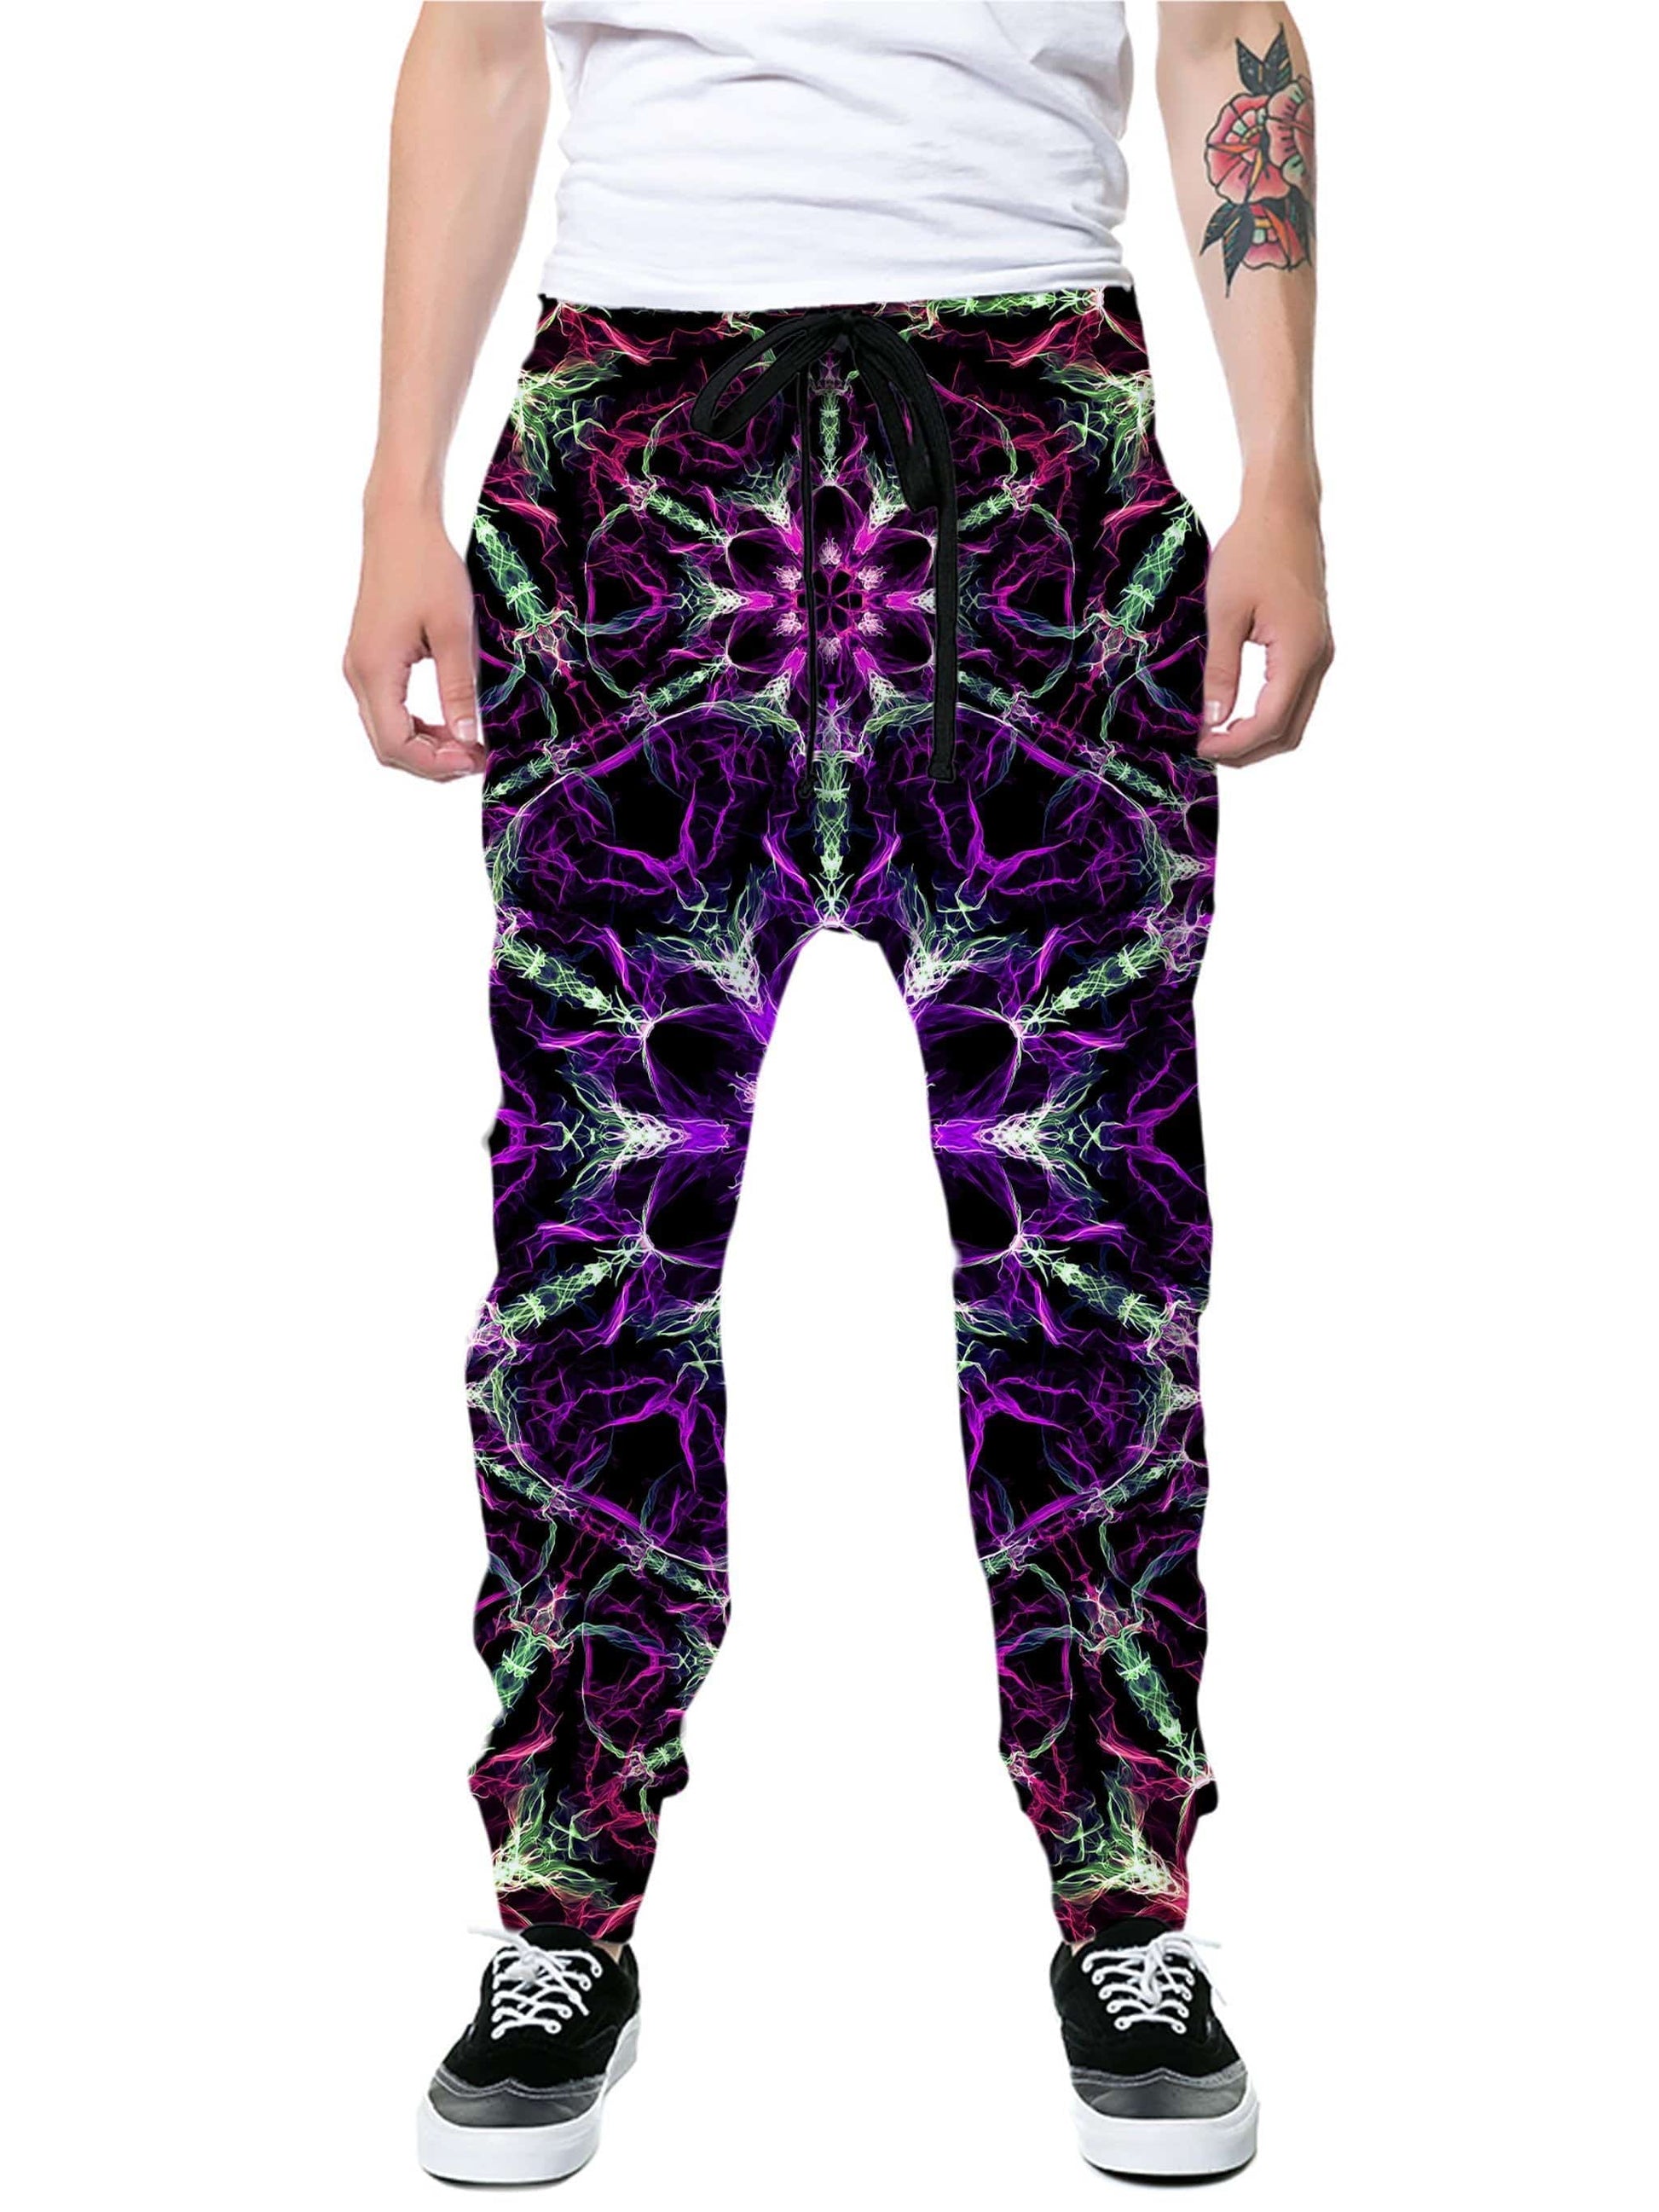 Psyched Joggers, Yantrart Design, | iEDM